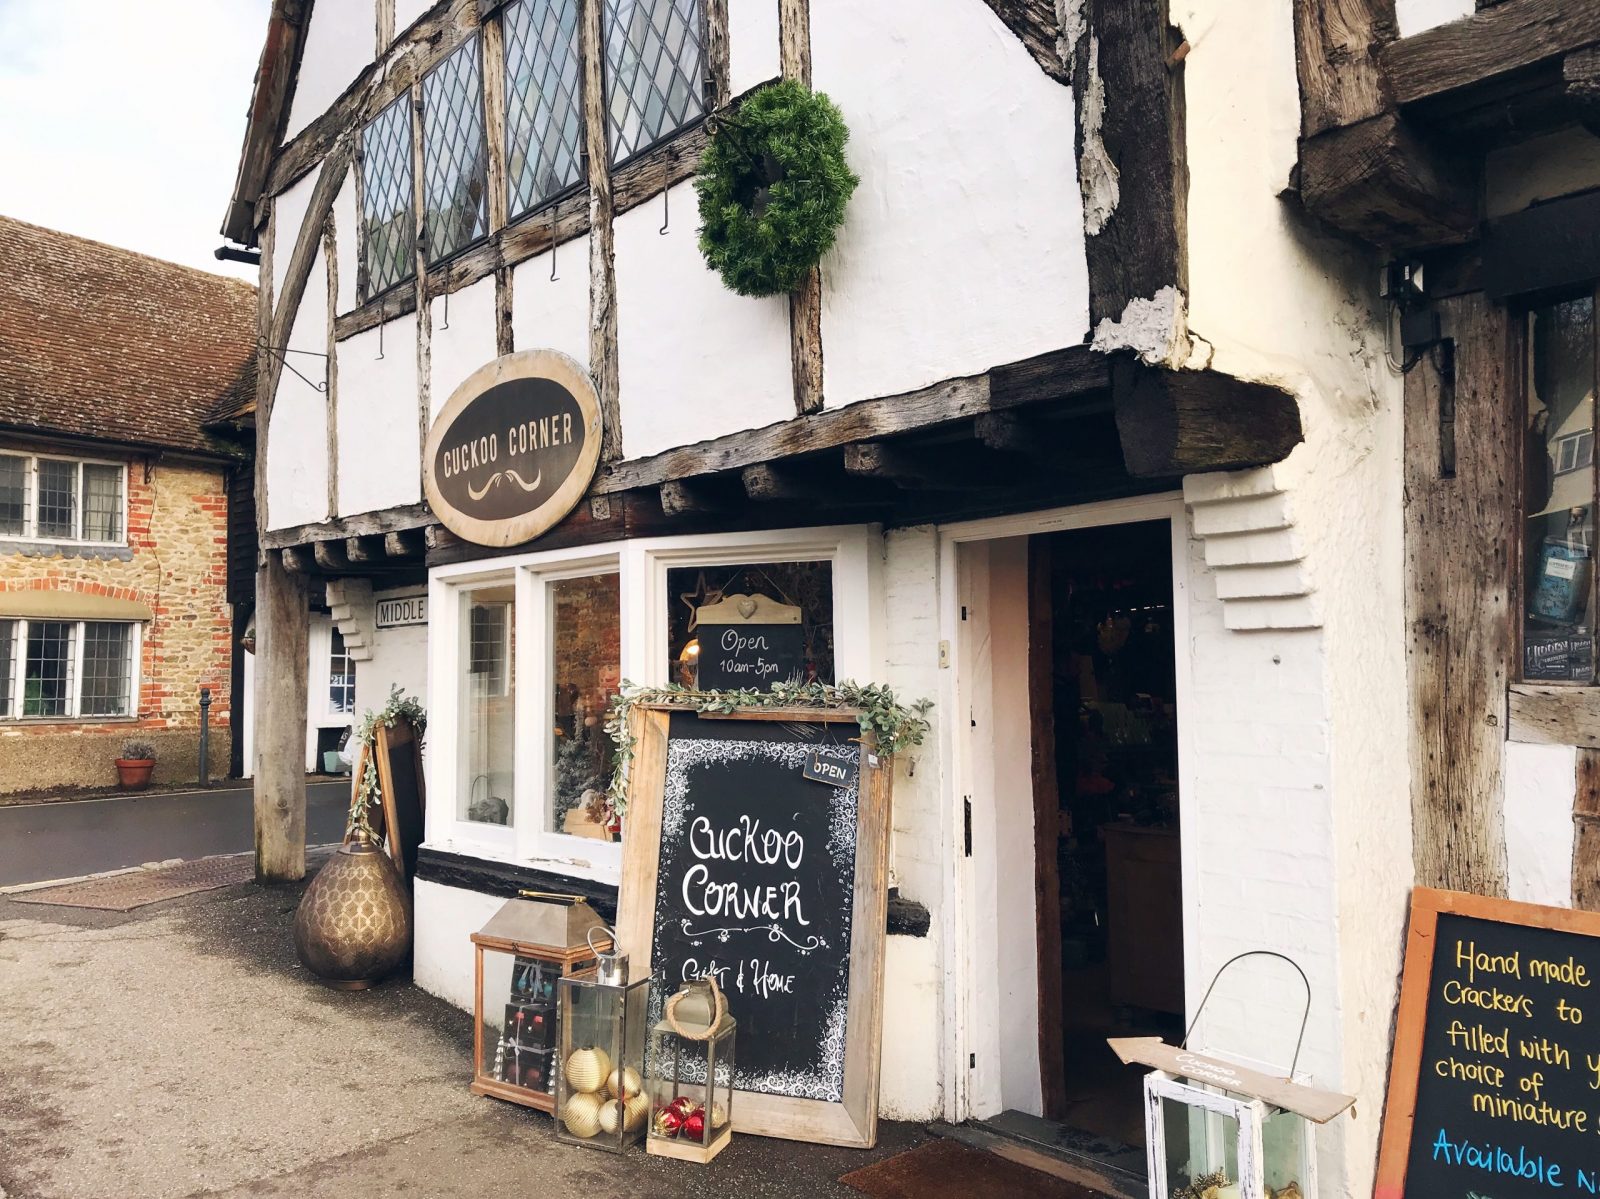 Surrey Hills walk and The English village of Shere